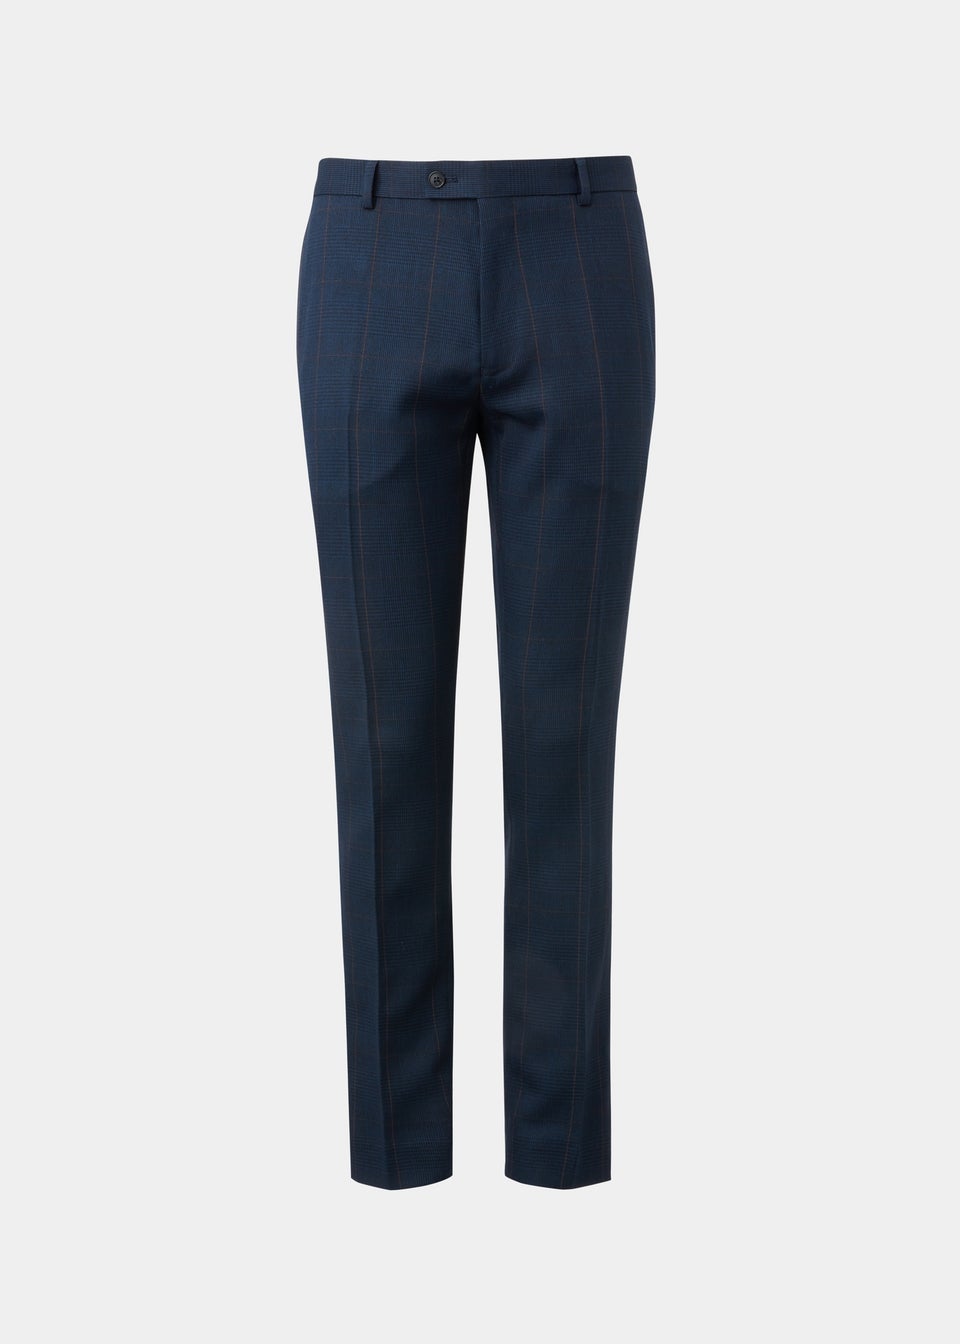 Taylor & Wright Westminster Navy Skinny Fit Suit Trousers